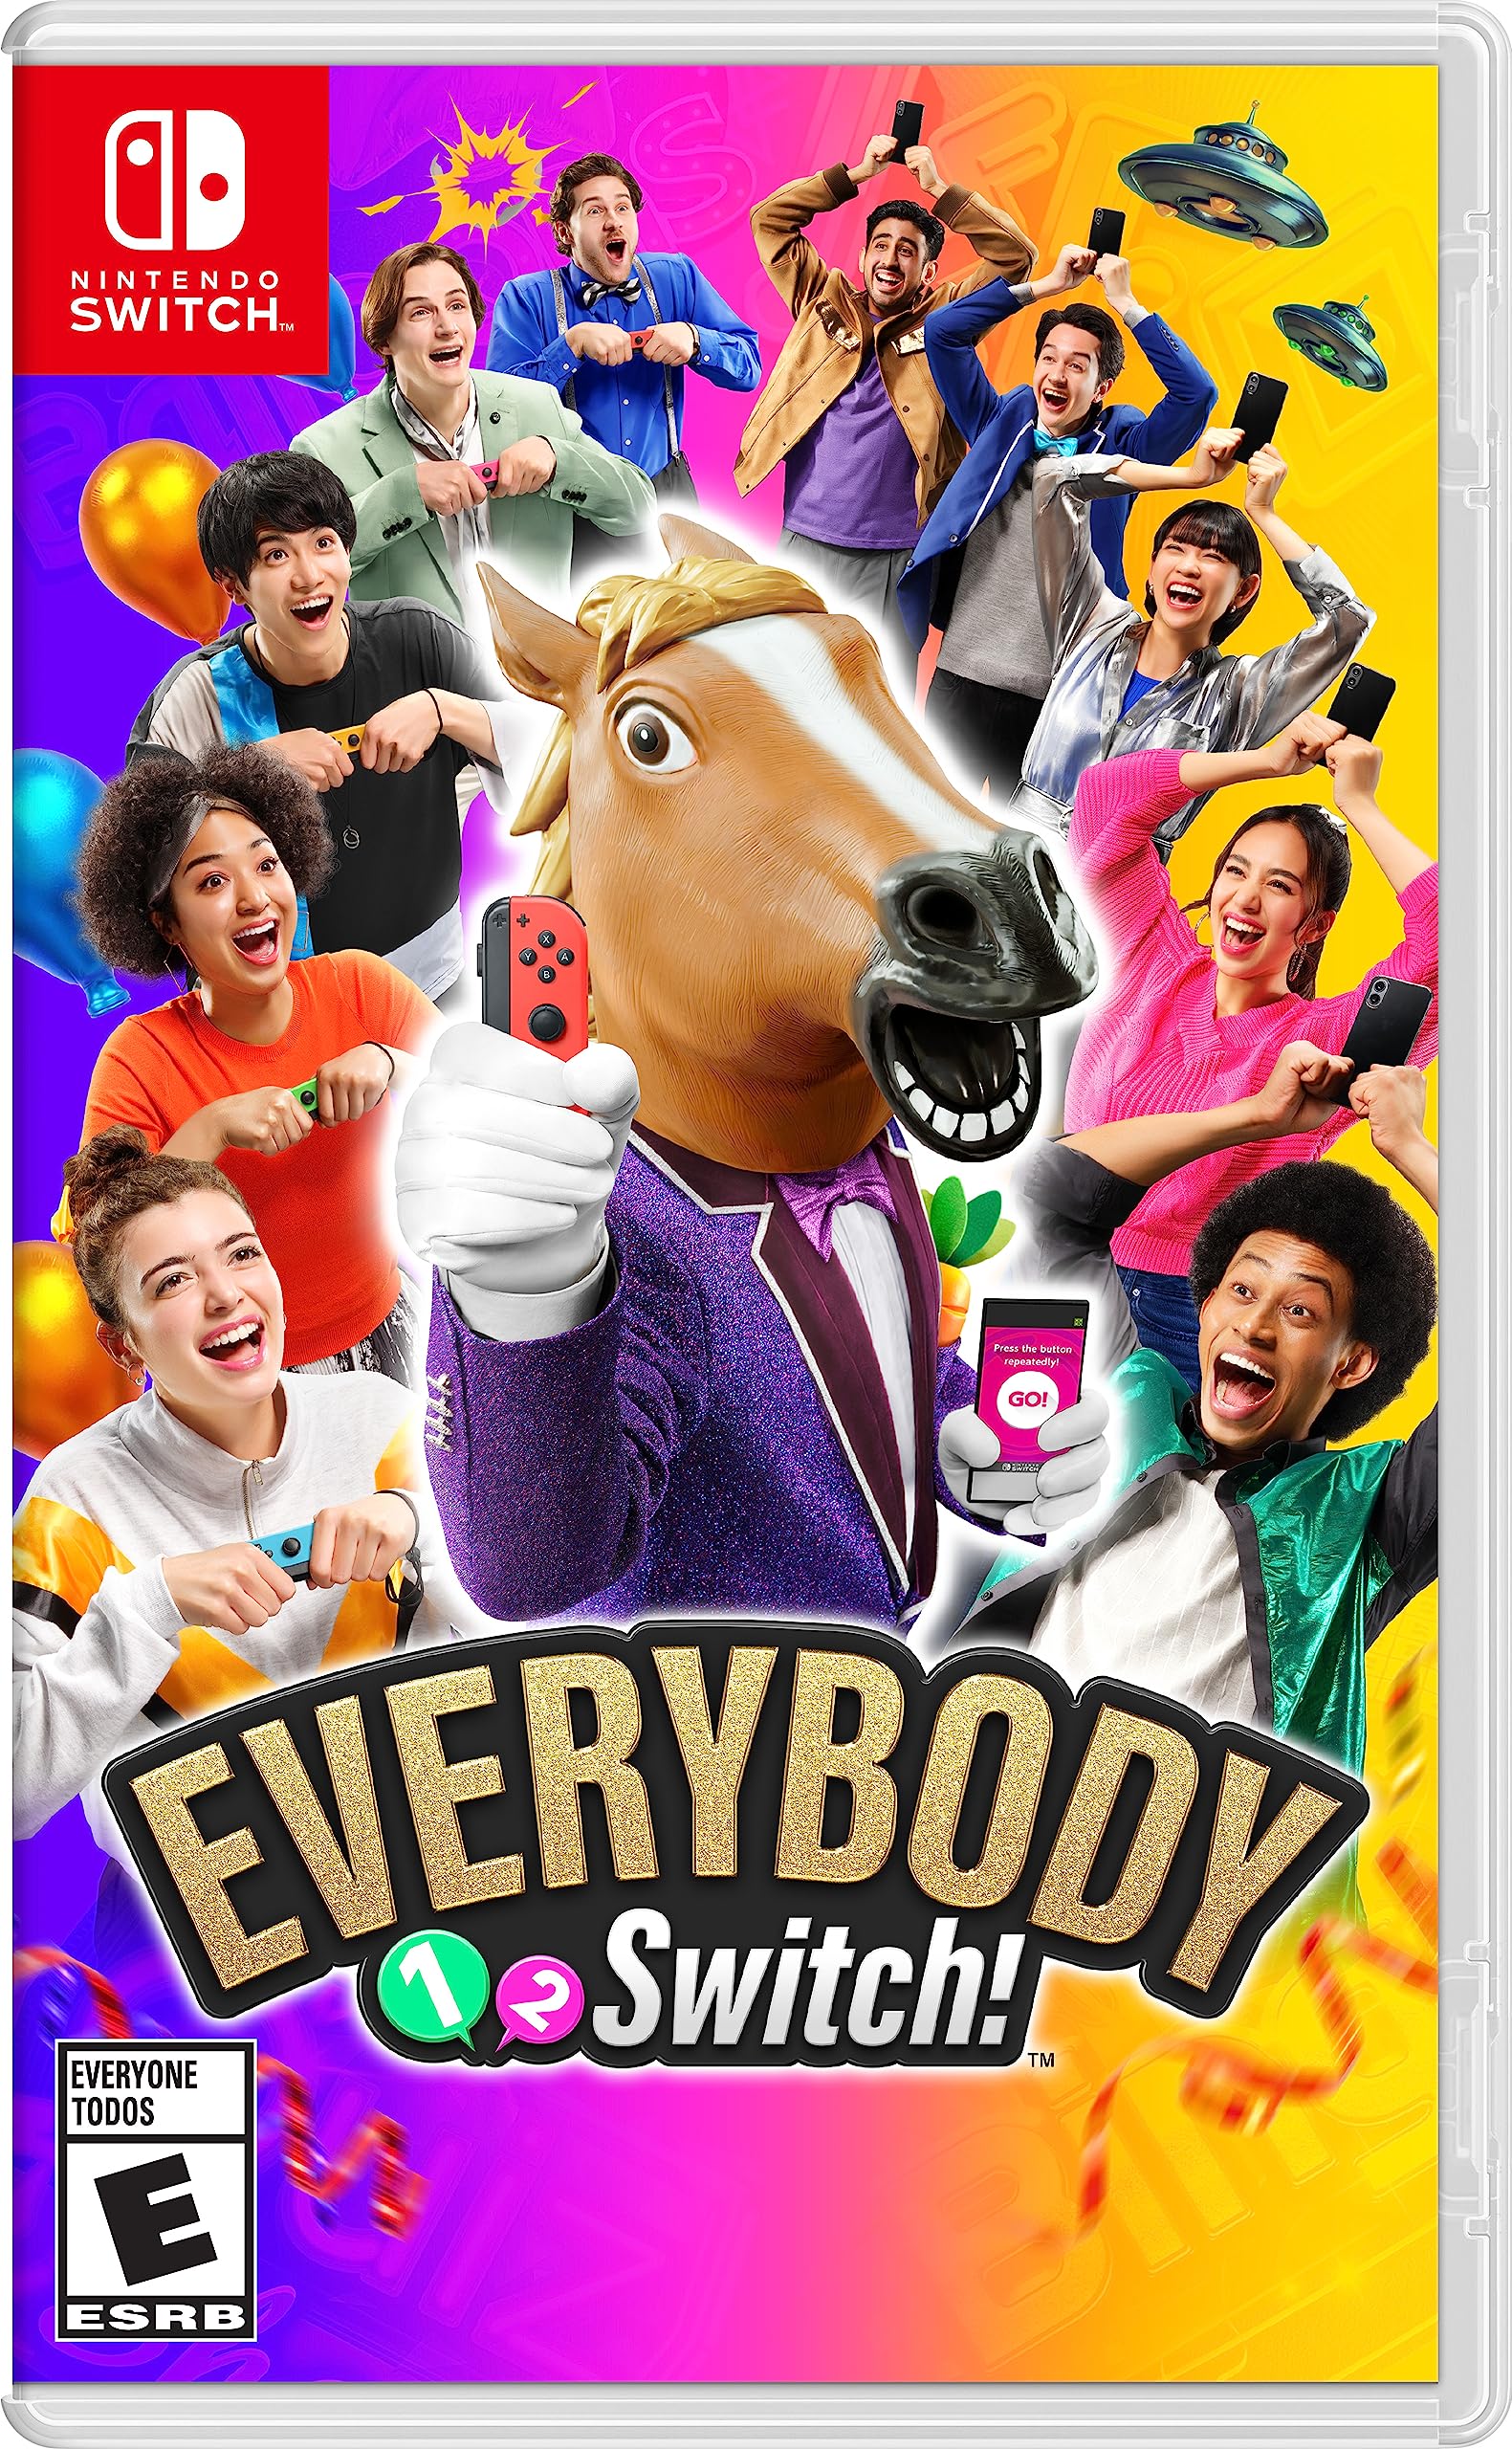 Everybody 1-2 Switch! (Nintendo Switch) $22 + Free Shipping w/ Prime or on orders over $35